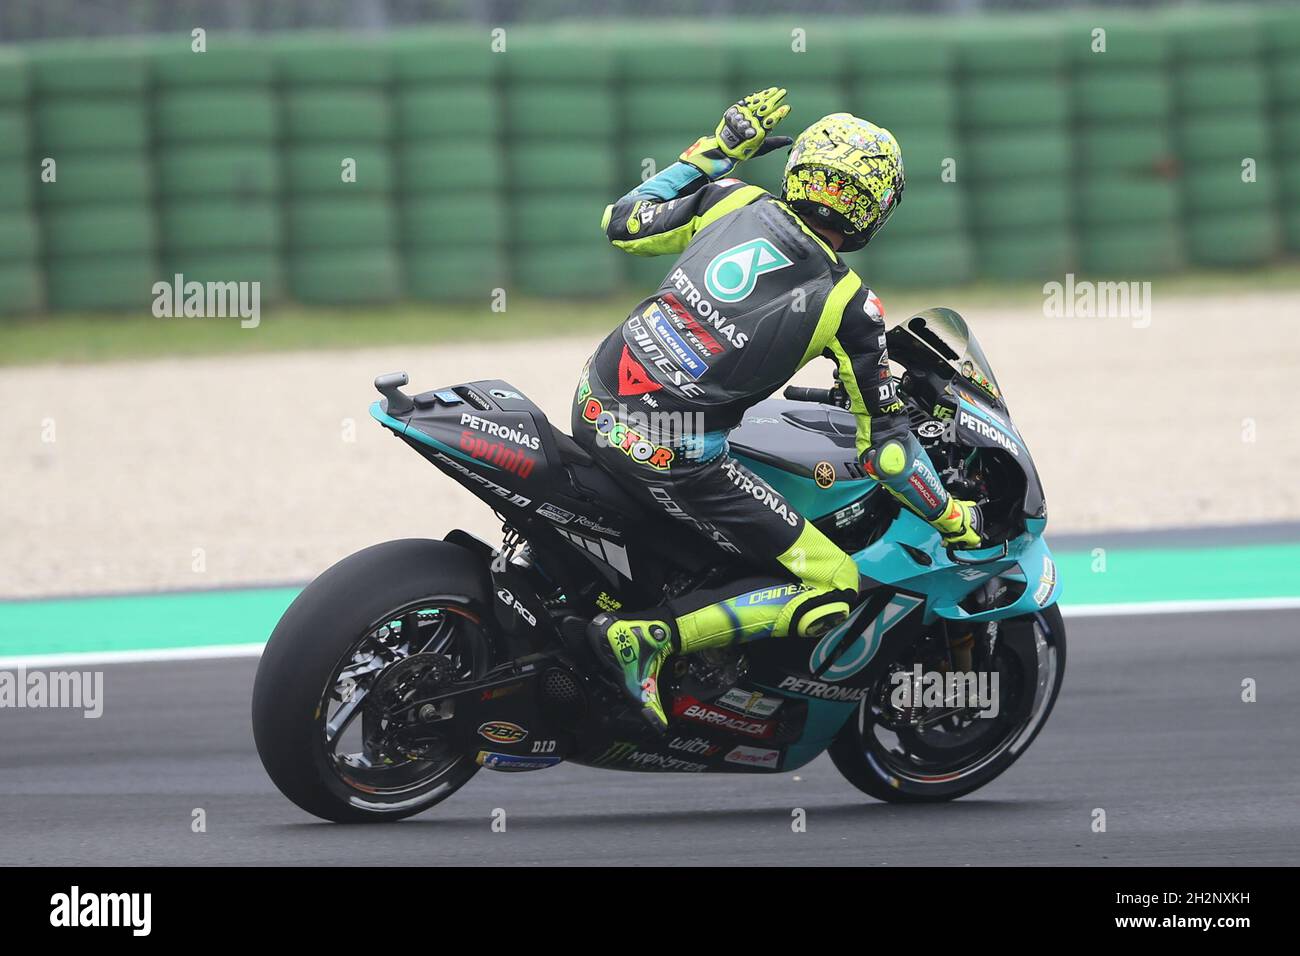 46 Valentino Rossi, Italian: Petronas Yamaha SRT waves to the fans at  Misano World Circuit Marco Simoncelli, Italy, 23 Oct, 2021 during  qualifying for the Gran Premio Nolan del made in Italy